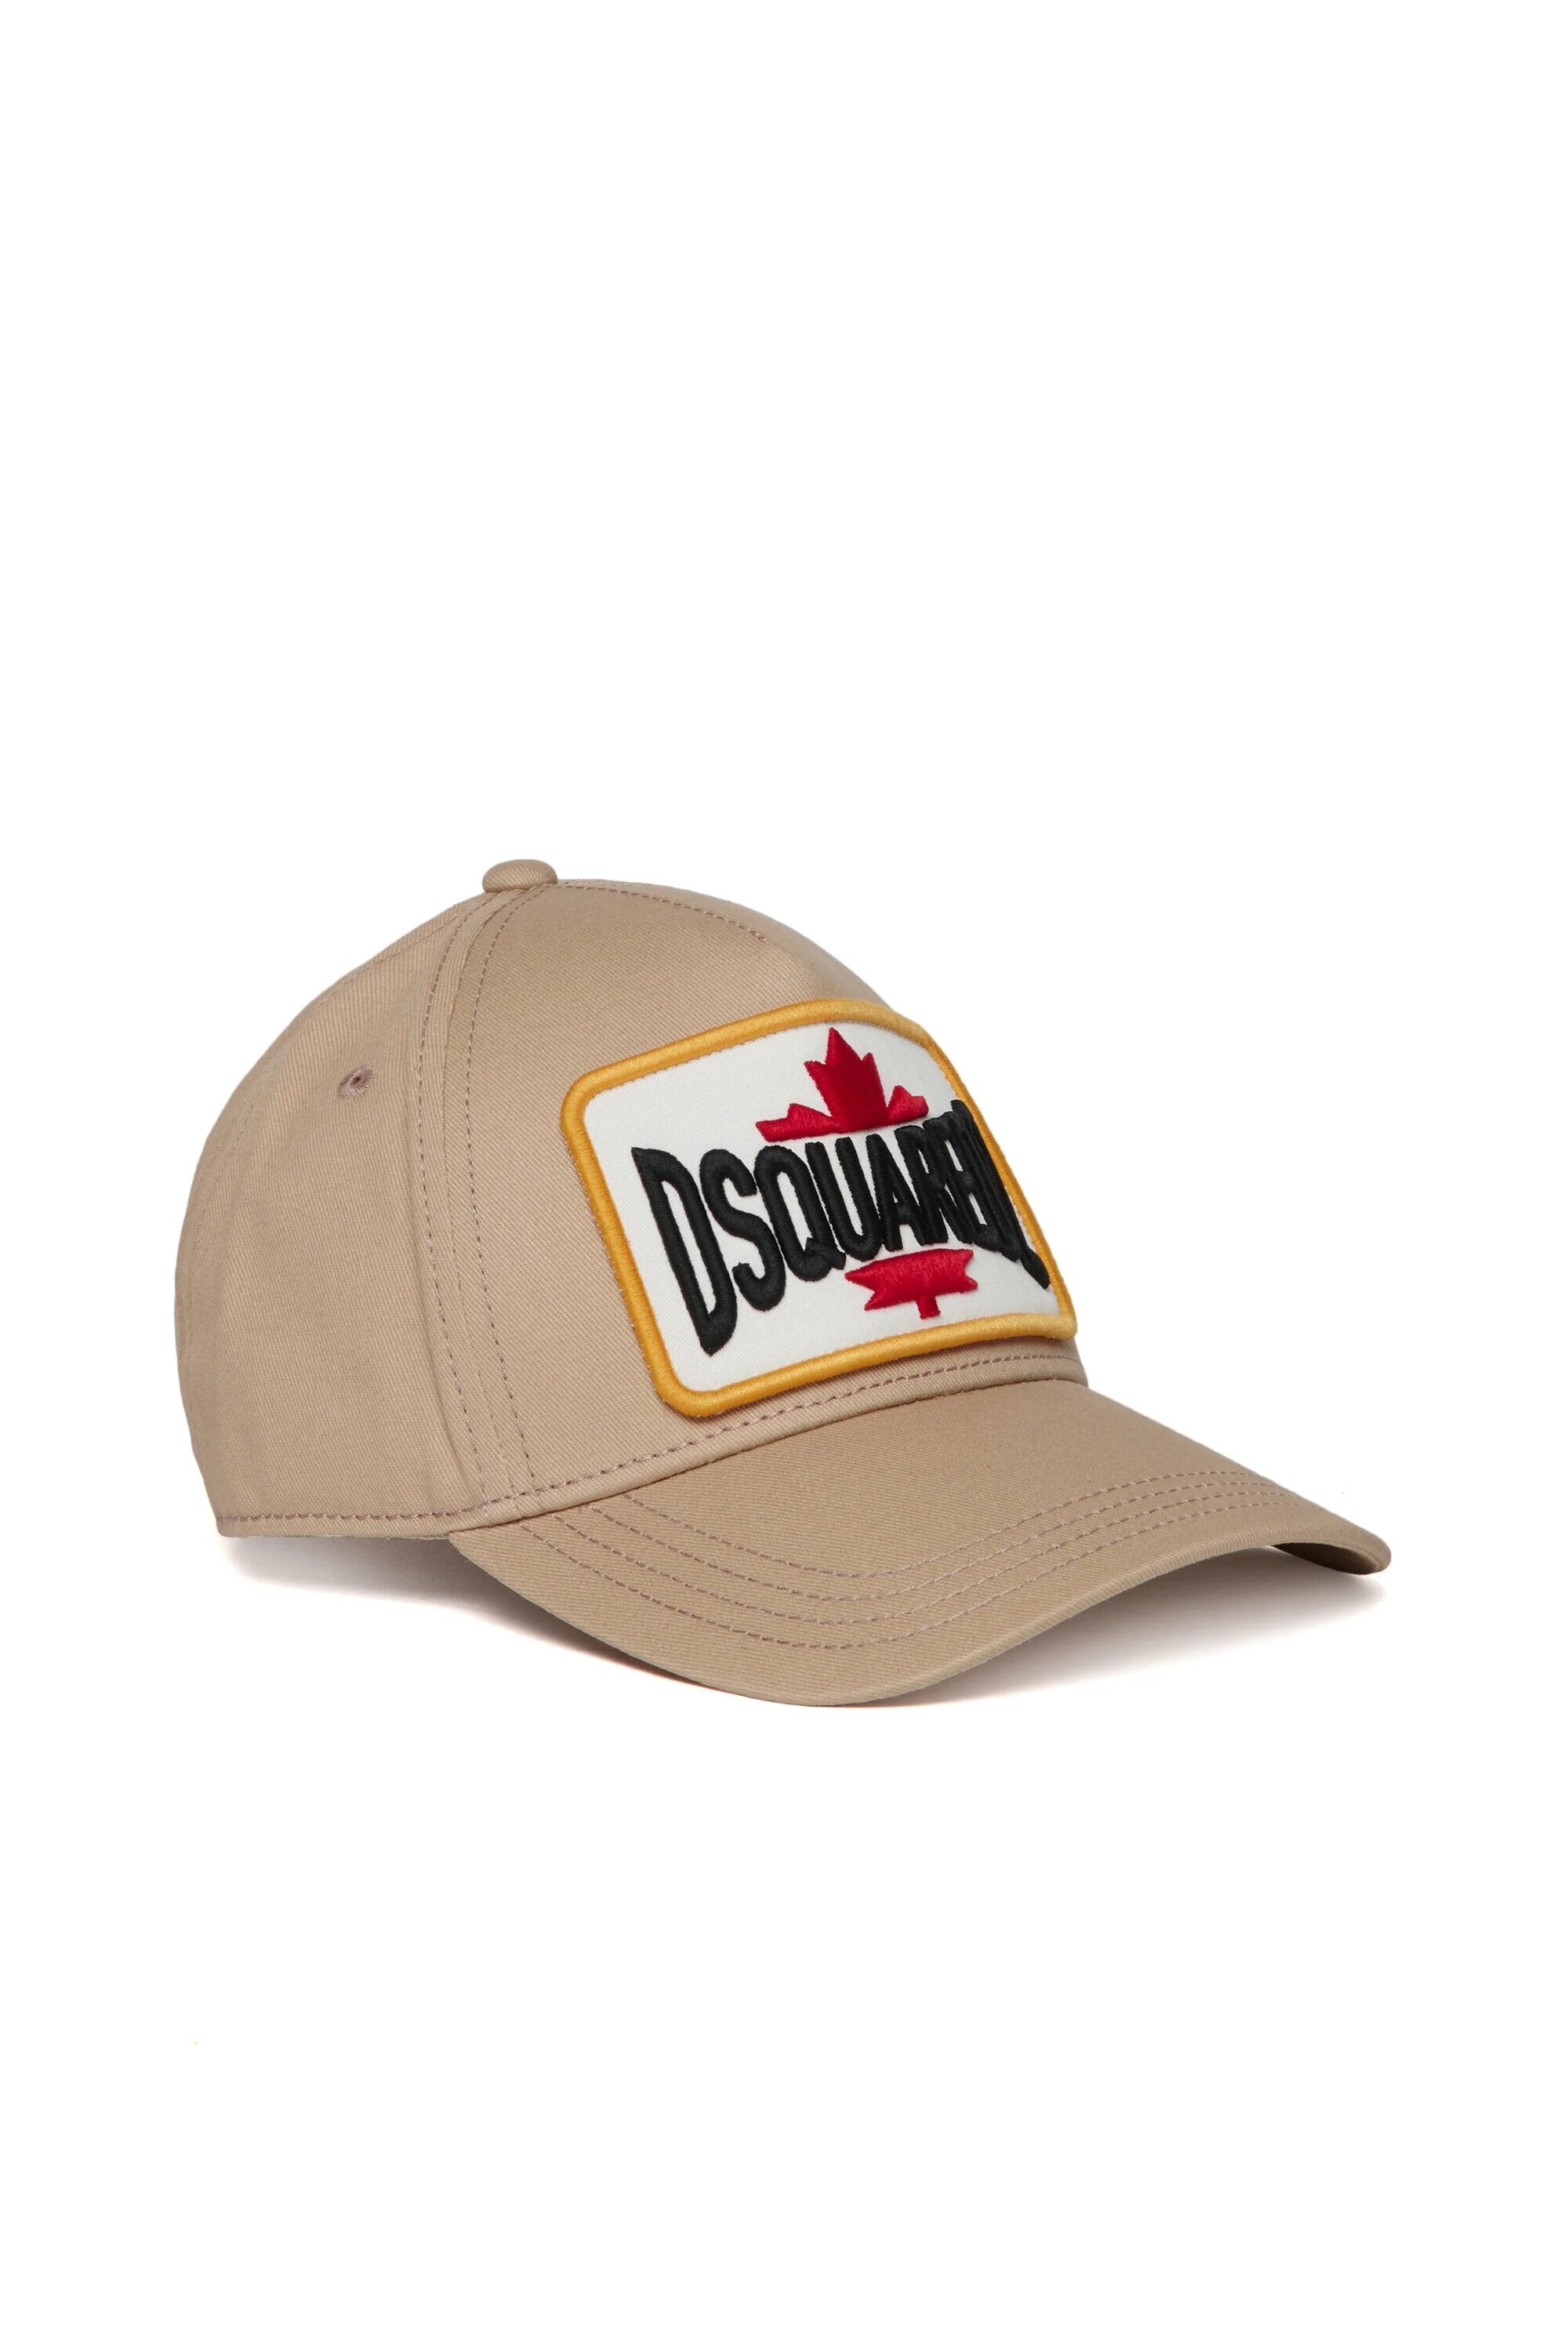 DSQUARED2-Cappello Bambino Patch Leaf-Beige